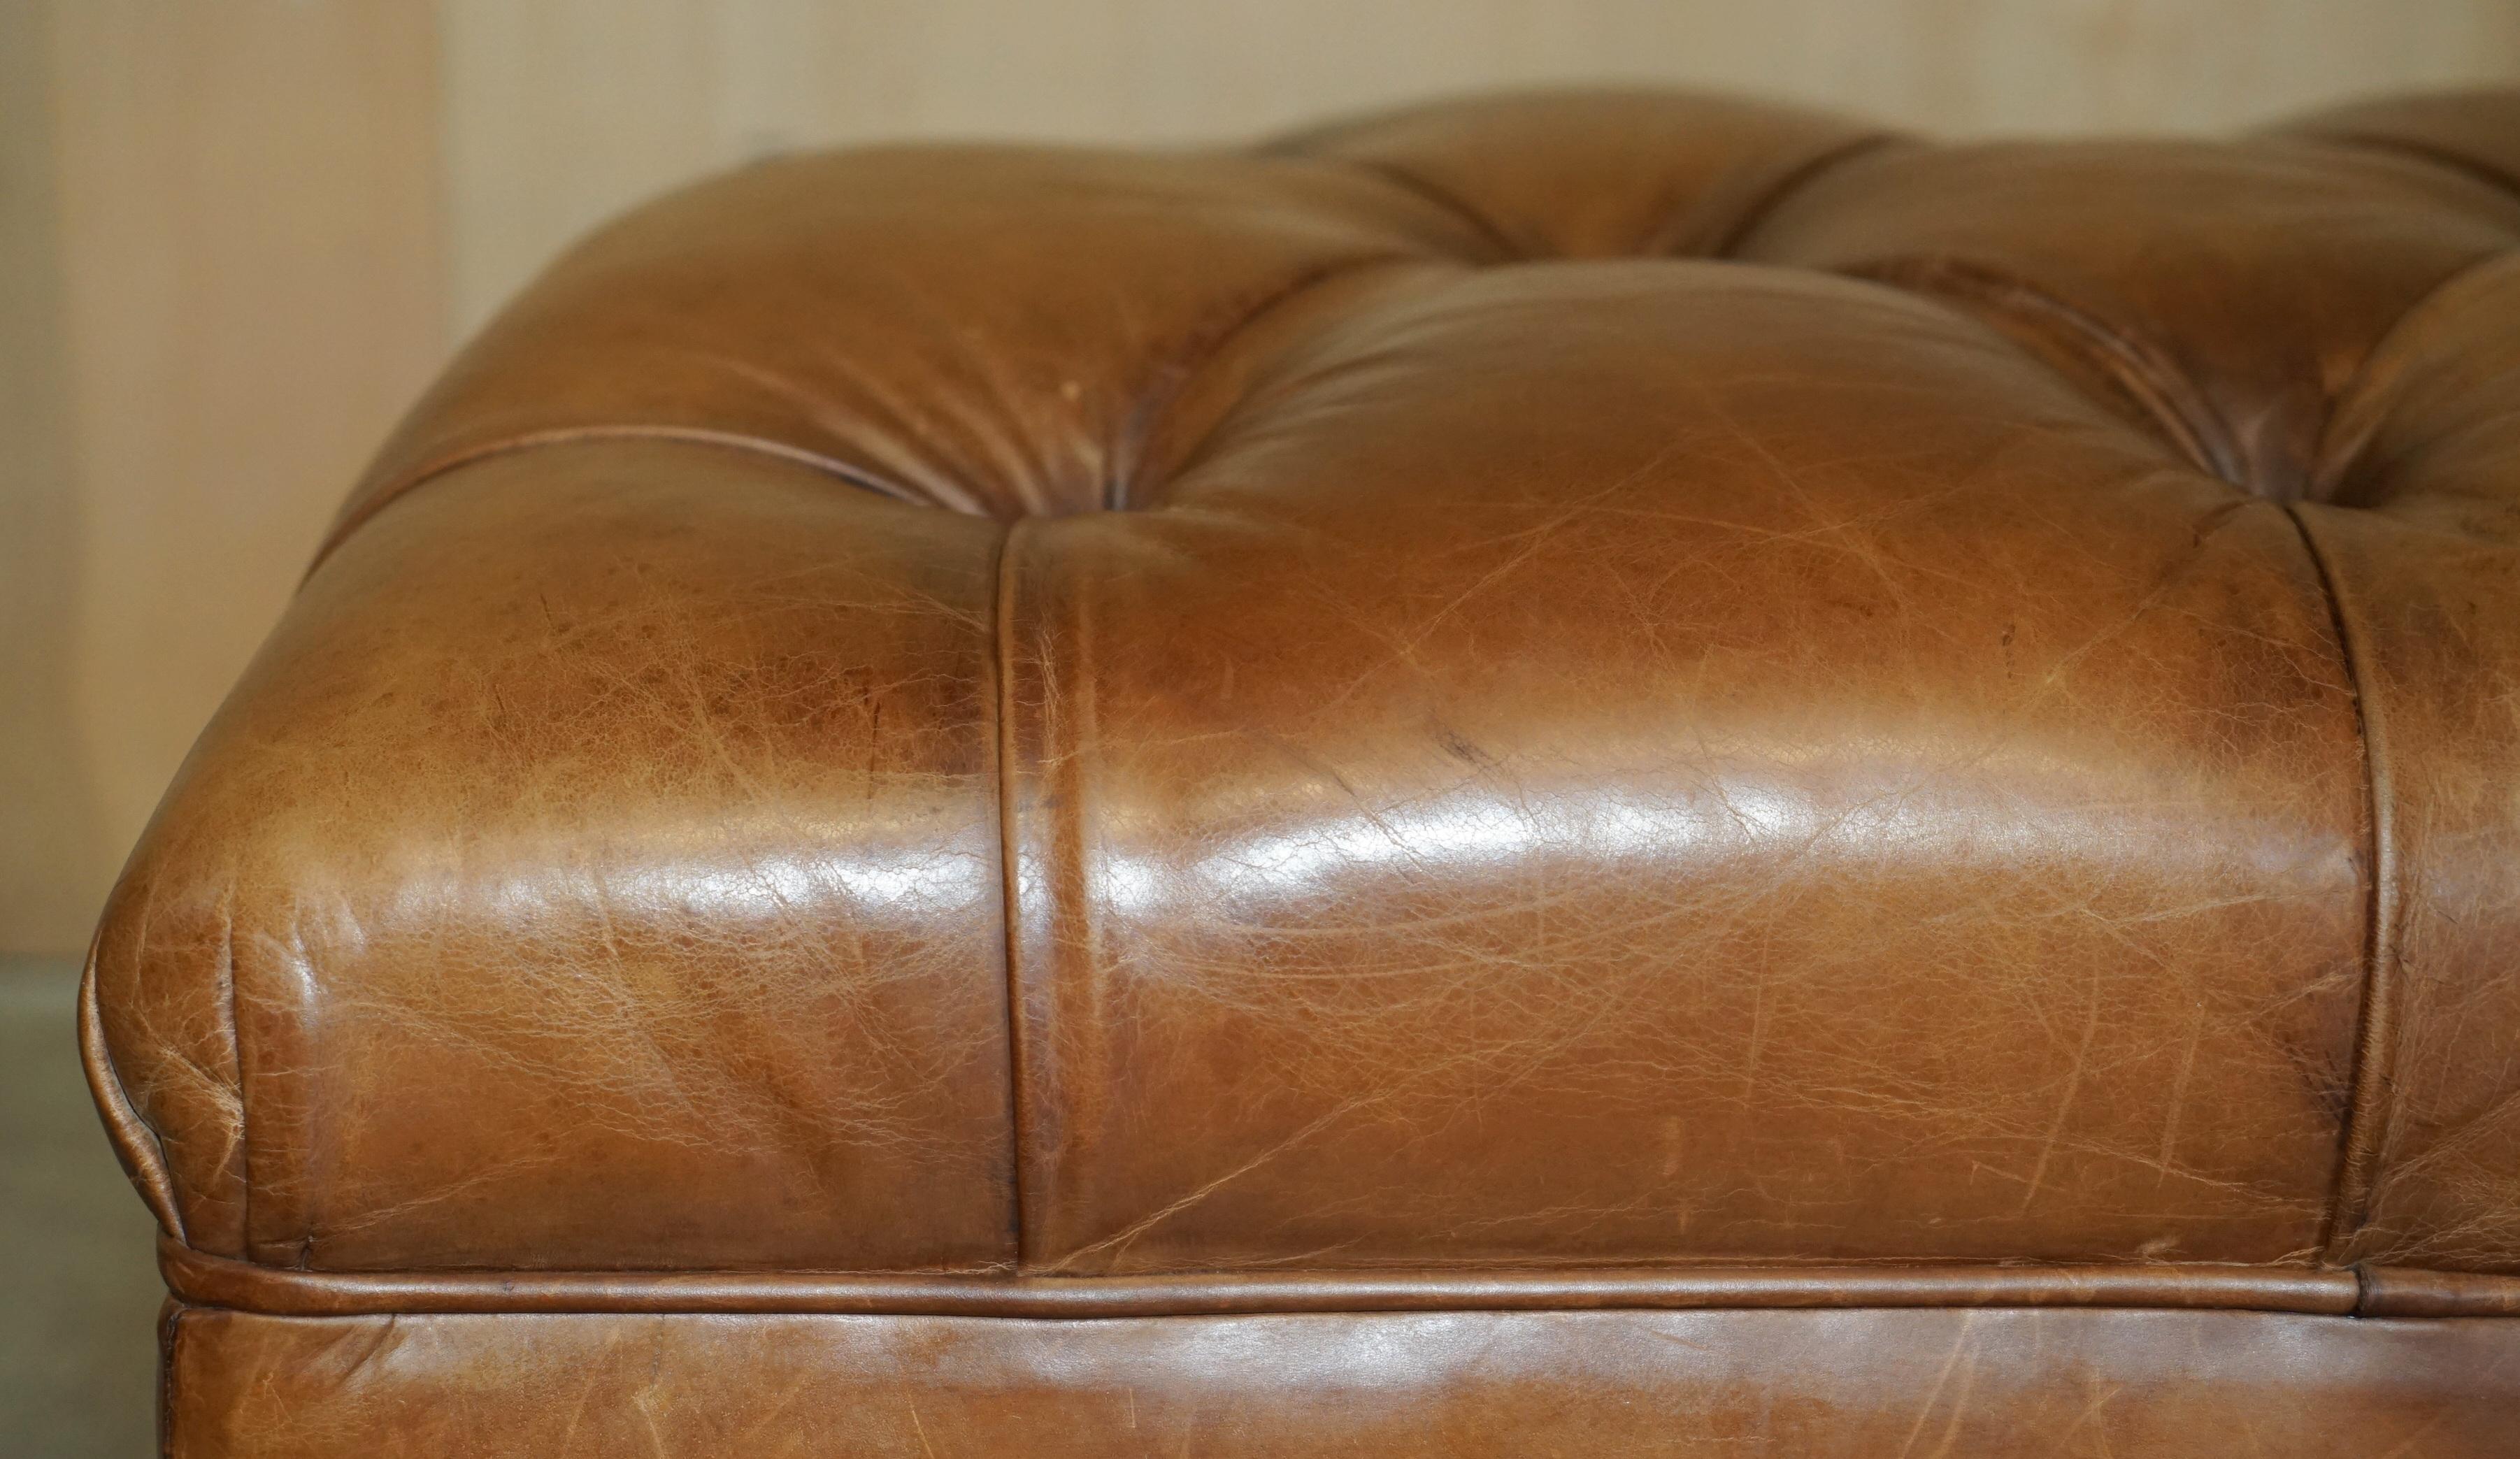 English RALPH LAUREN WRITER'S CHESTERFIELD FOOTSTOOL OTTOMAN IN HERiTAGE BROWN LEATHER